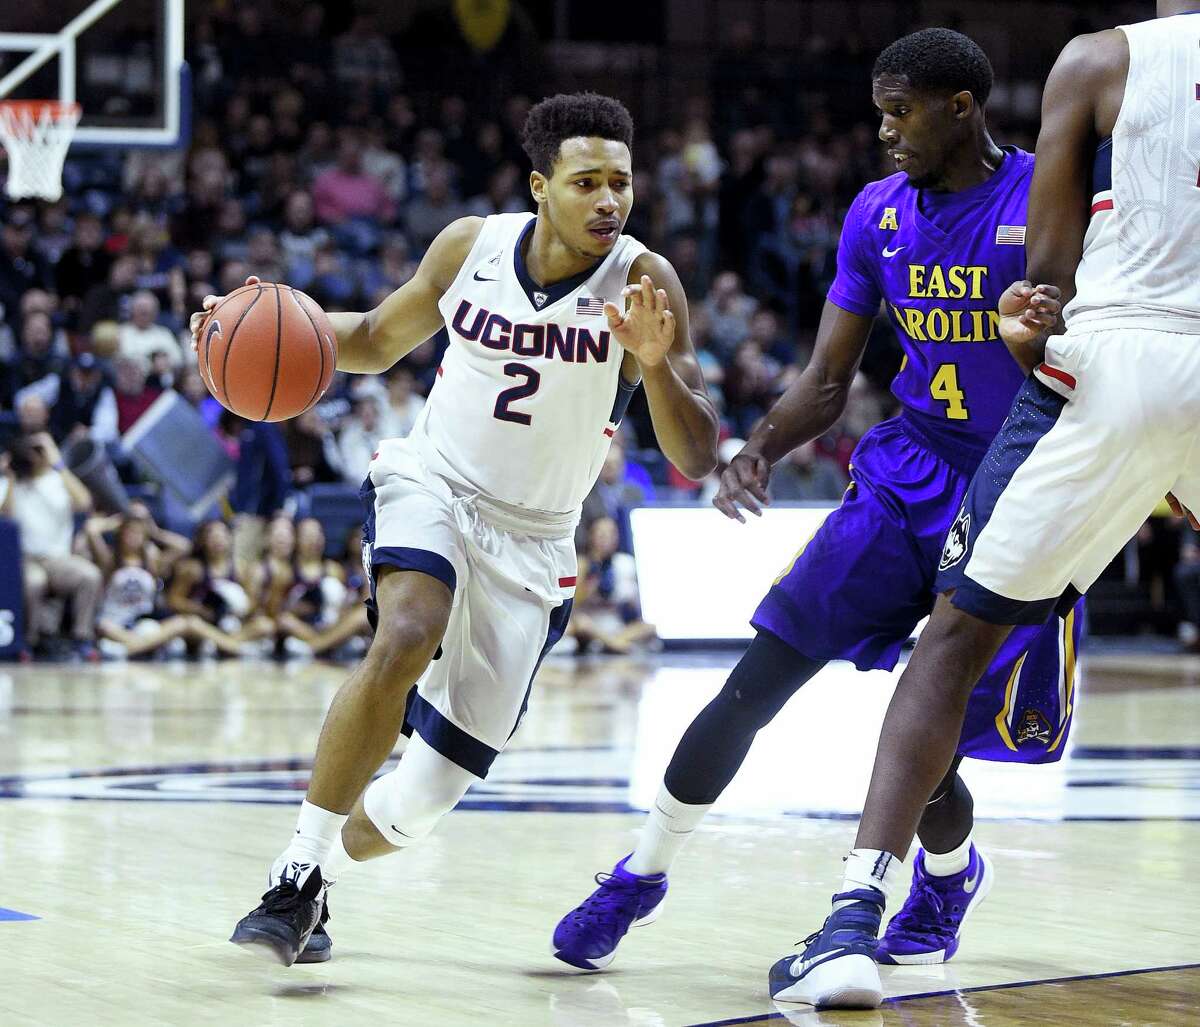 Connecticut's Jalen Adams (2) drives past East Carolina's Prince Williams (4) during the first half of an NCAA college basketball game in Storrs, Conn., on Sunday, Feb. 7, 2016. (AP Photo/Fred Beckham)